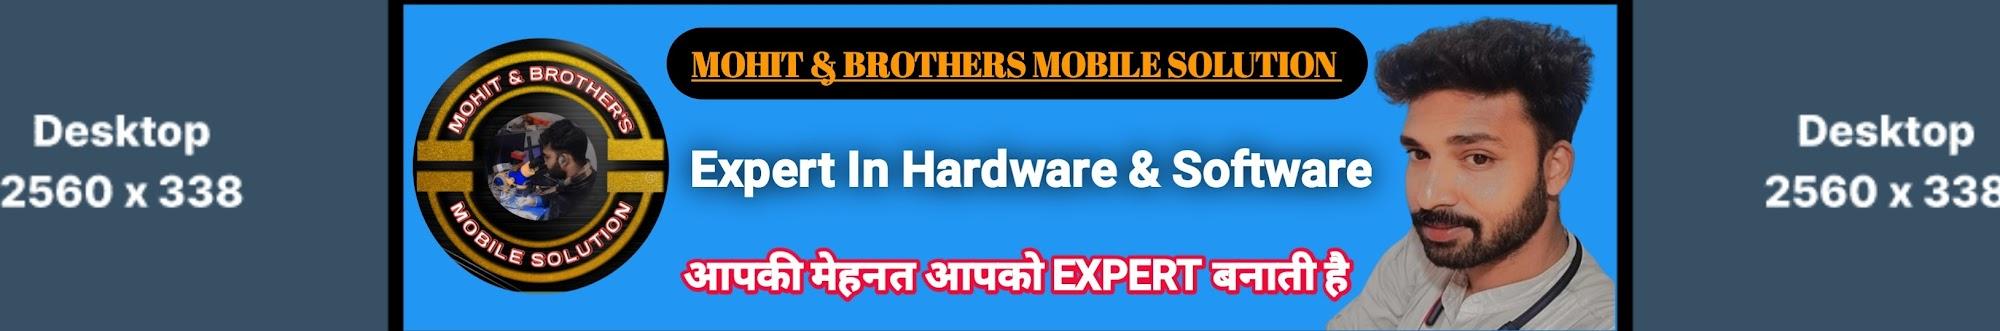 Mohit & Brothers Mobile solution